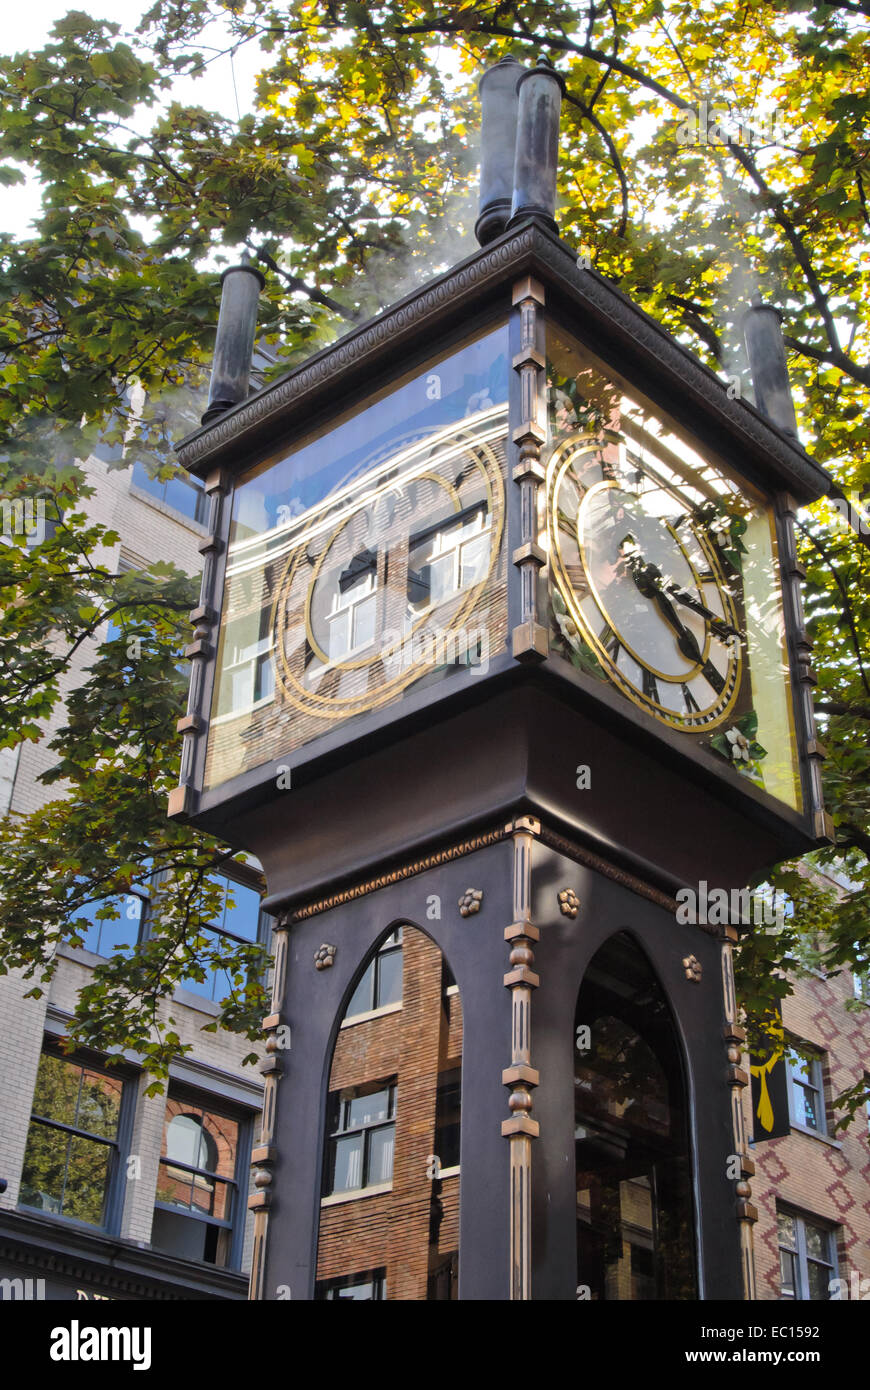 Steam clock surrounded by trees Stock Photo